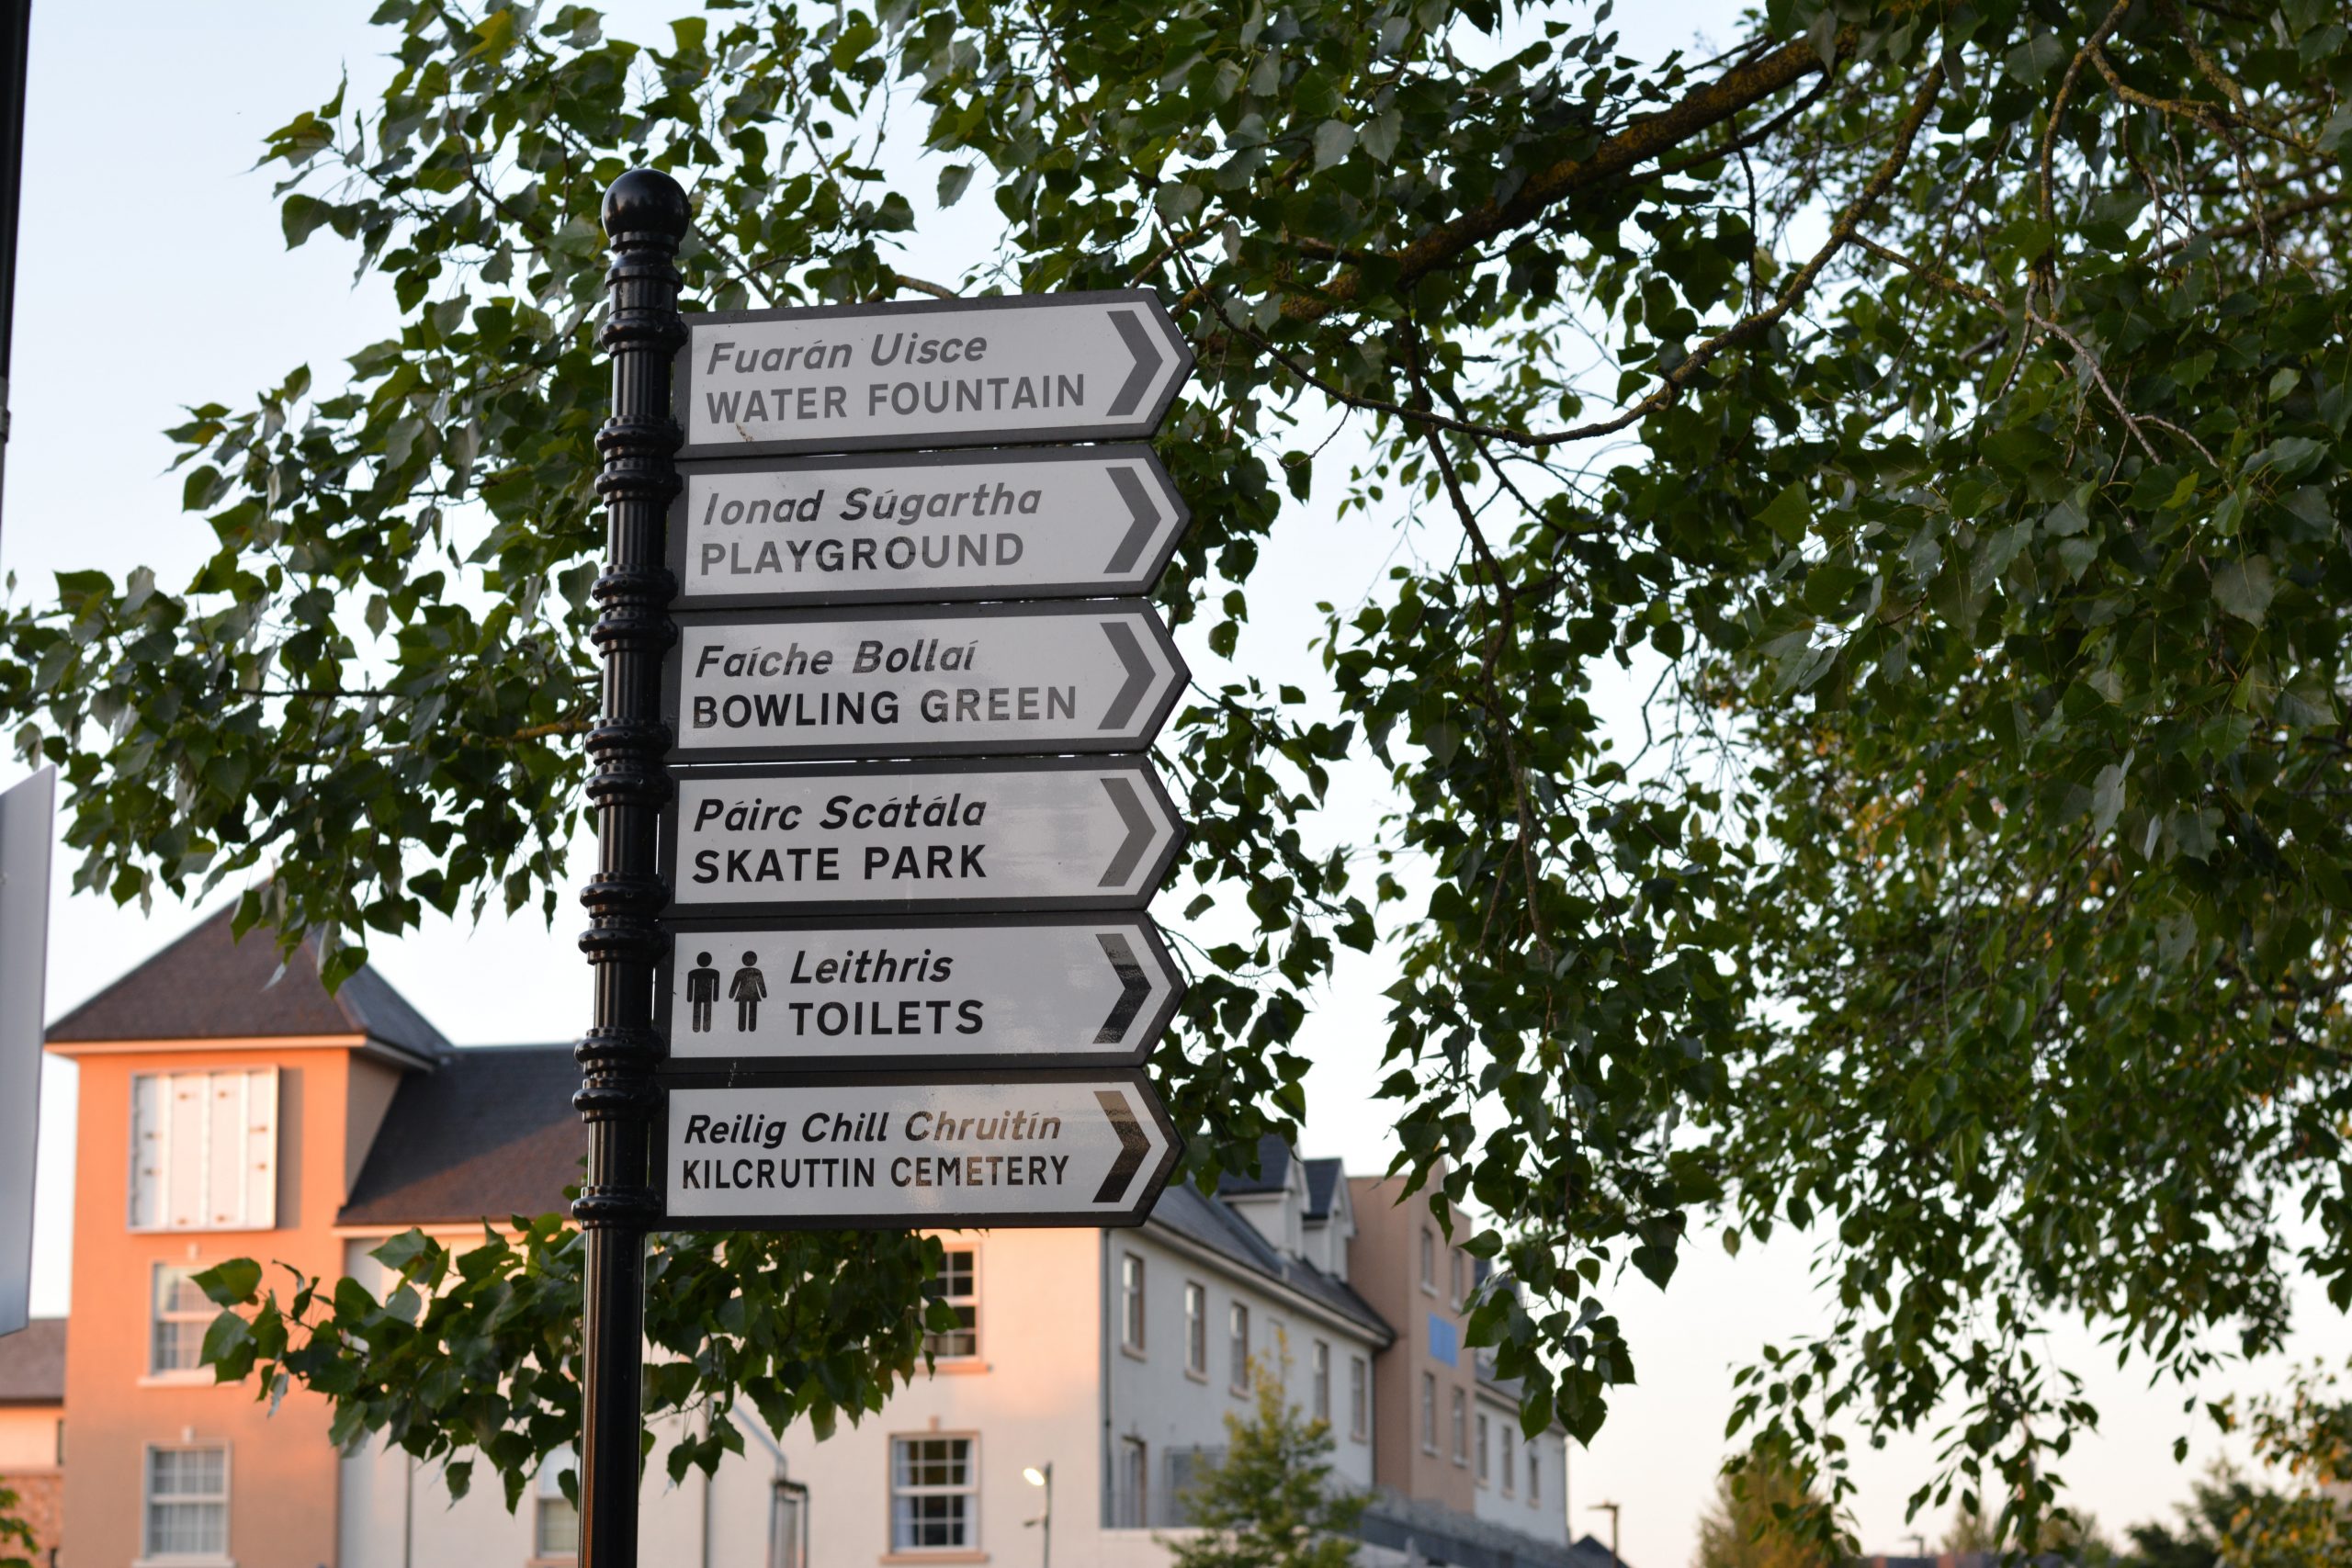 black and white sign post in Tullamore, Co. Offaly. The signpost features 6 individual signs with English-Irish translations for local amenities like skate park (Páirc Scátála), playground (ionad súgartha) and toilets (leithris)